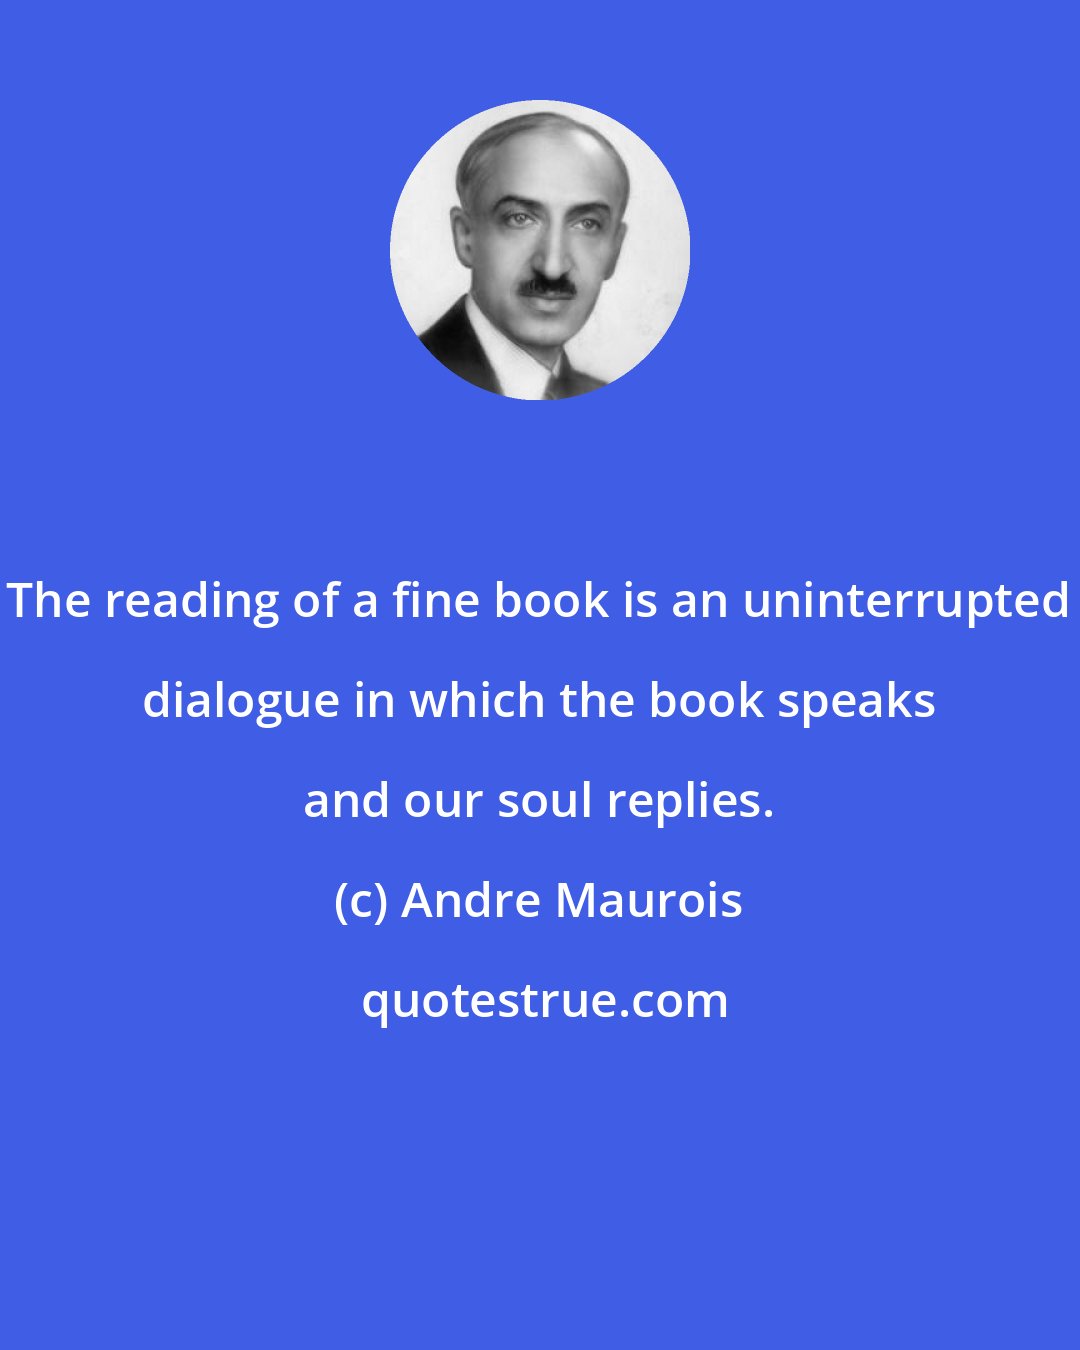 Andre Maurois: The reading of a fine book is an uninterrupted dialogue in which the book speaks and our soul replies.